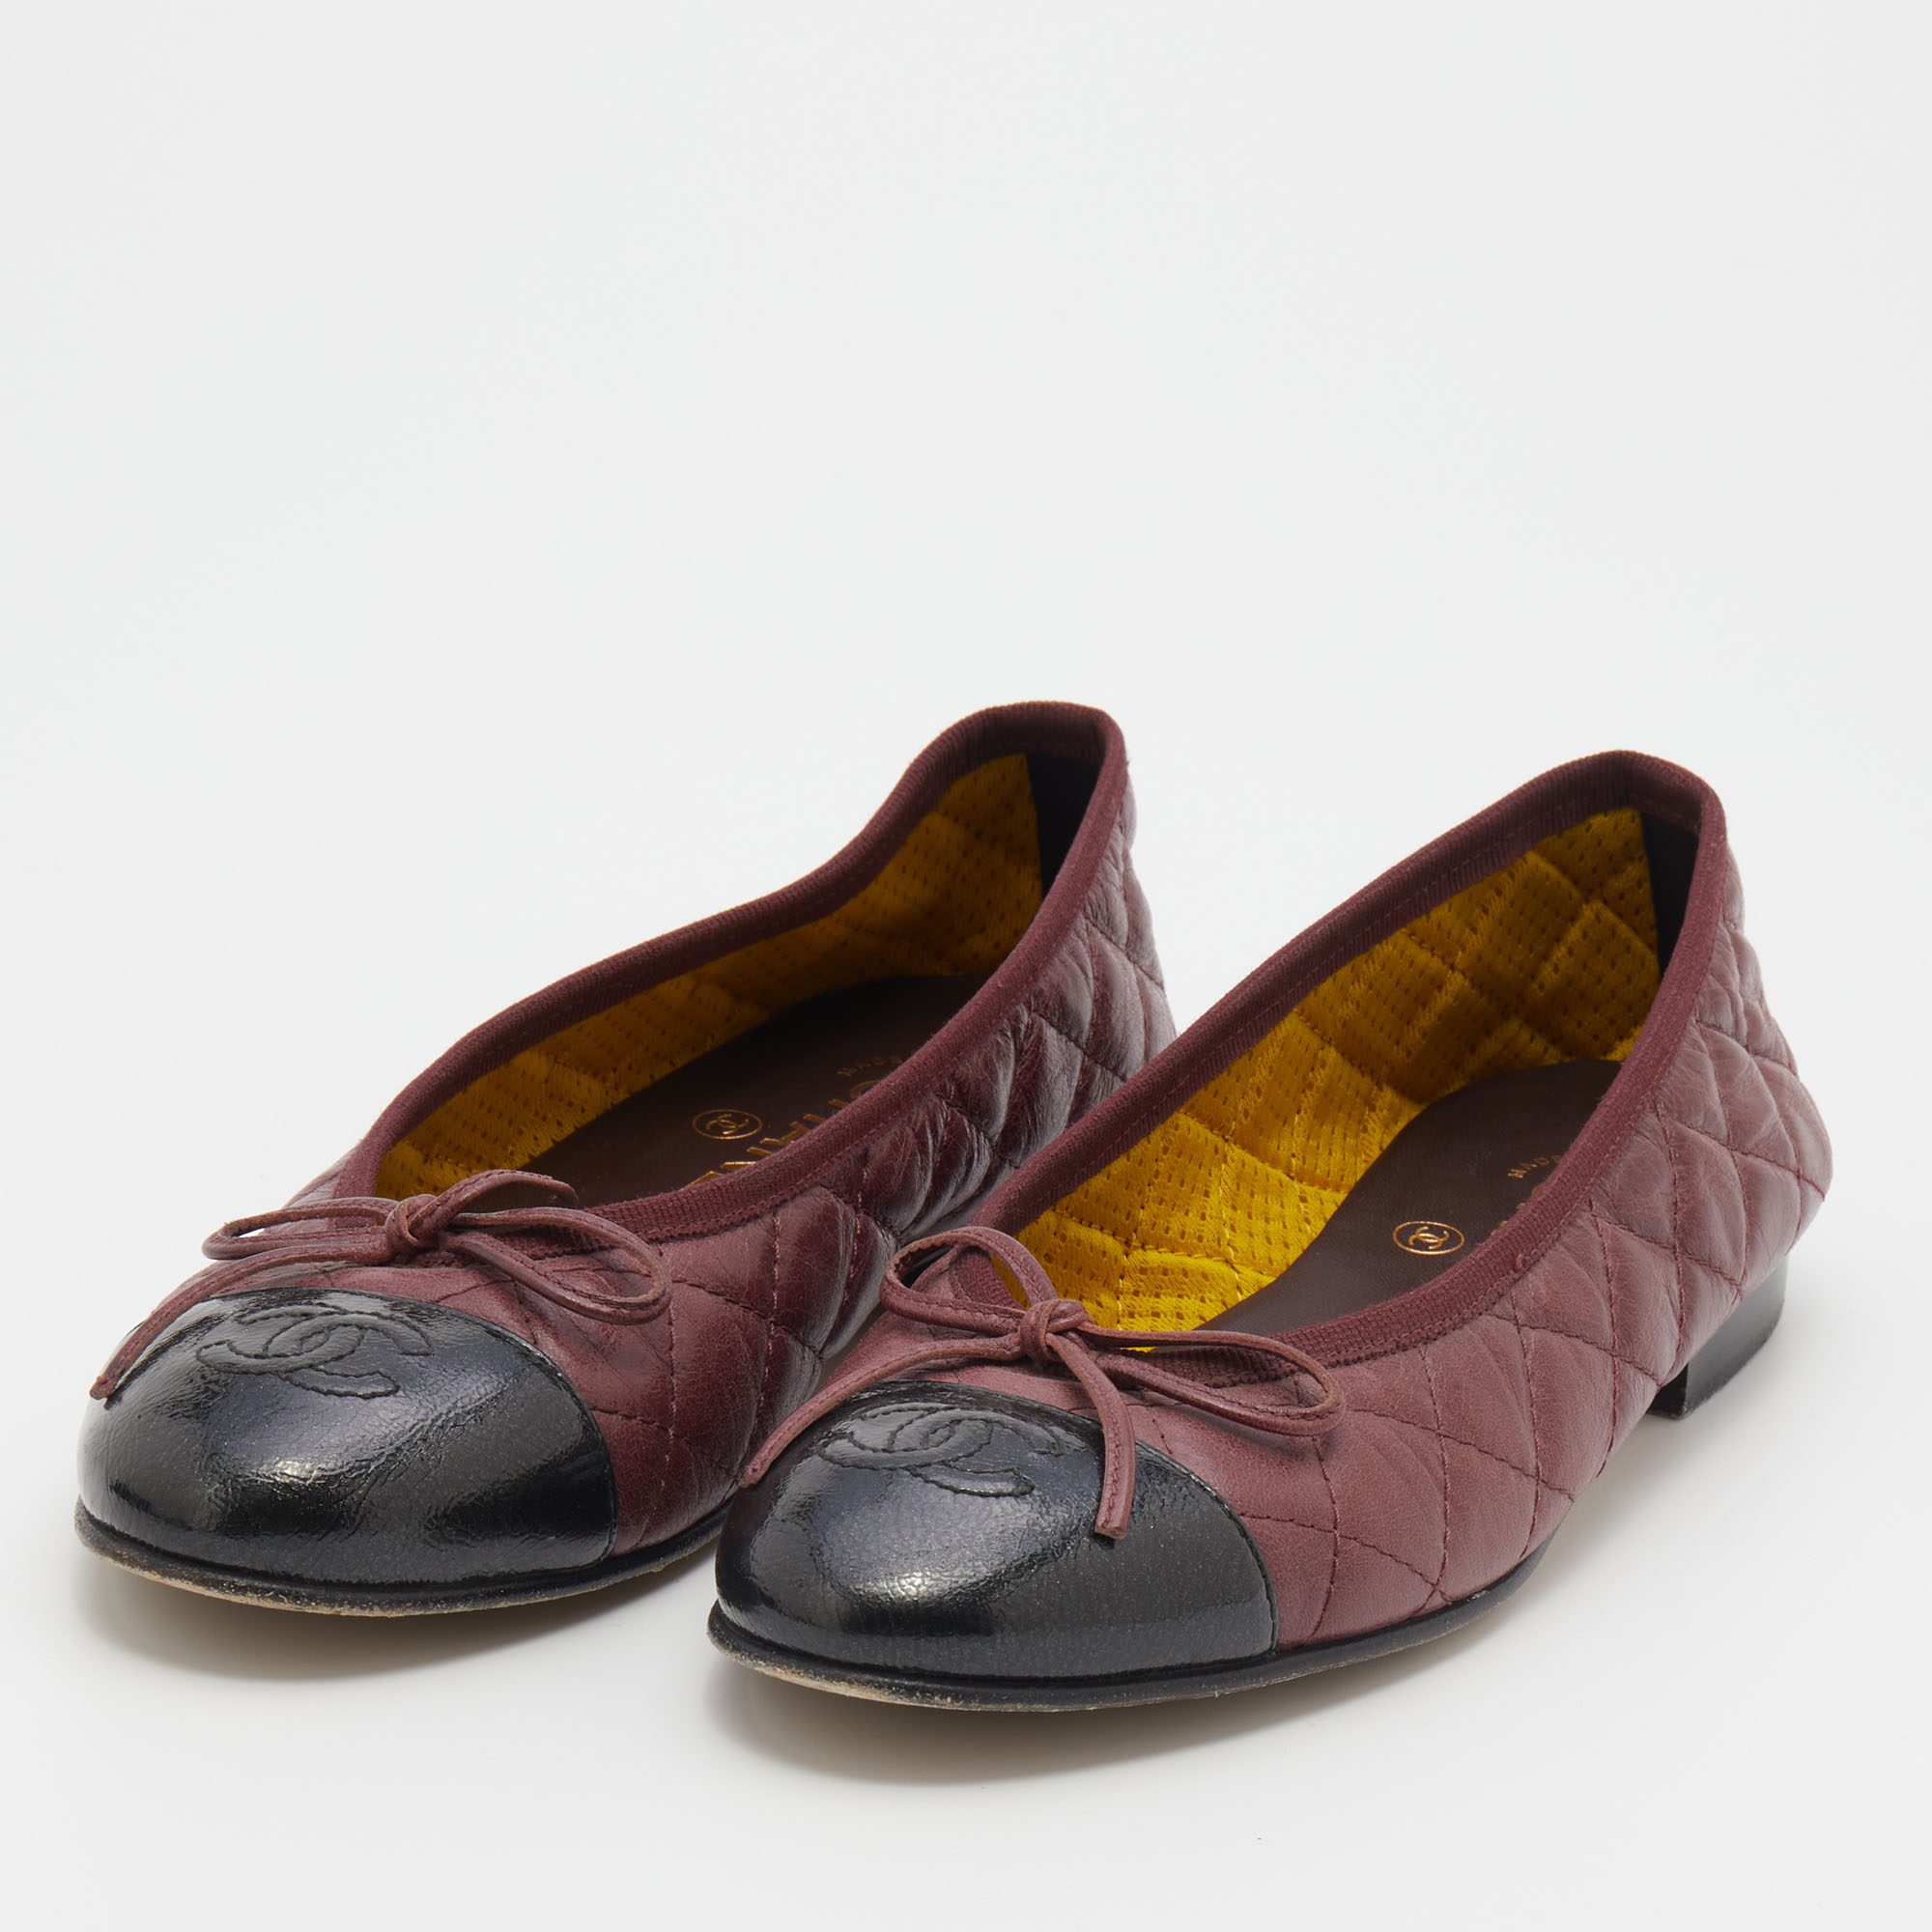 Chanel Burgundy/Black Patent and Leather CC Bow Cap Toe Ballet Flats Size 36  - buy with discount